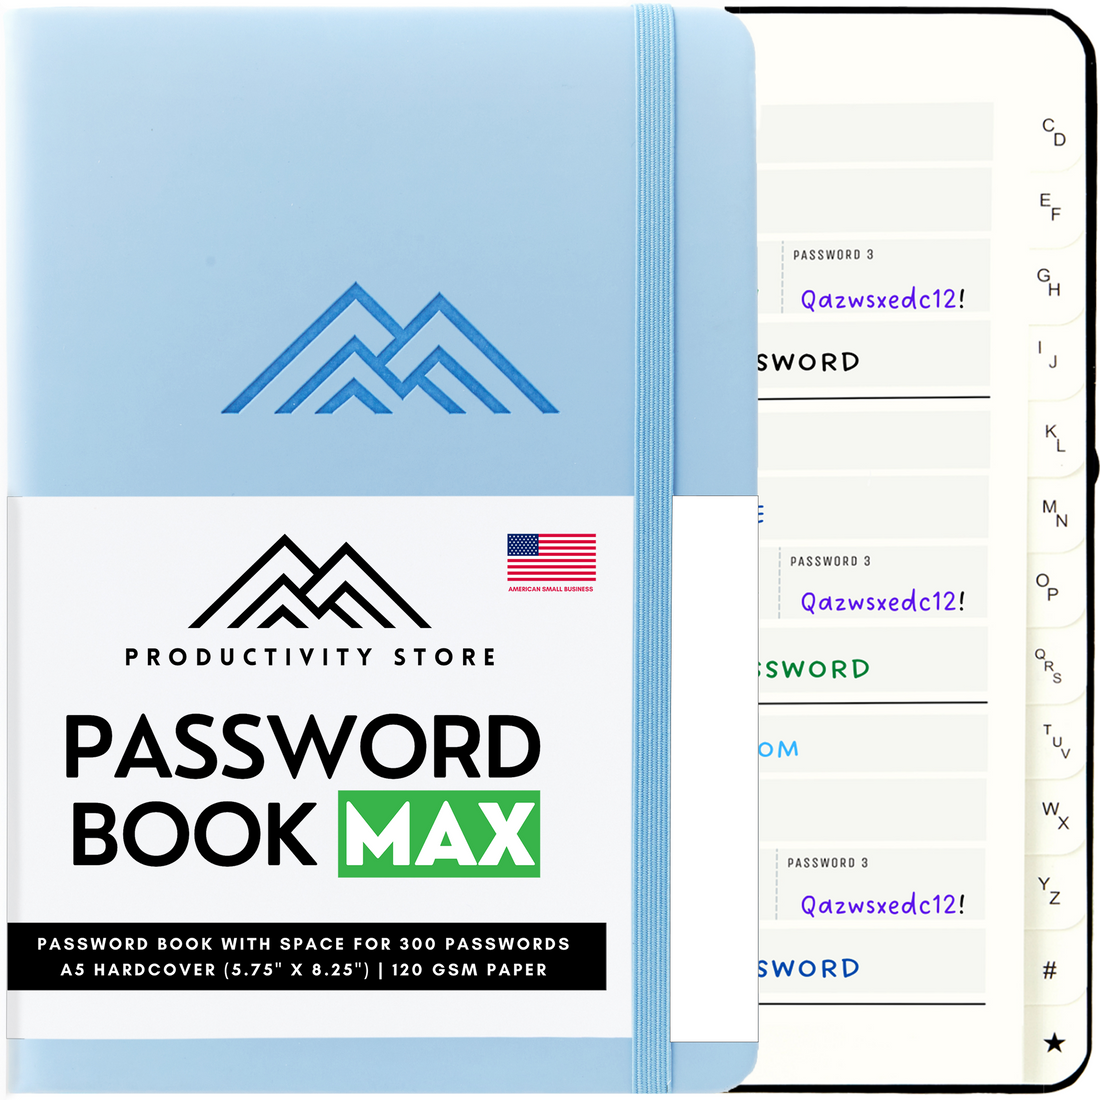 Enhancing Password Protection with Advanced Techniques